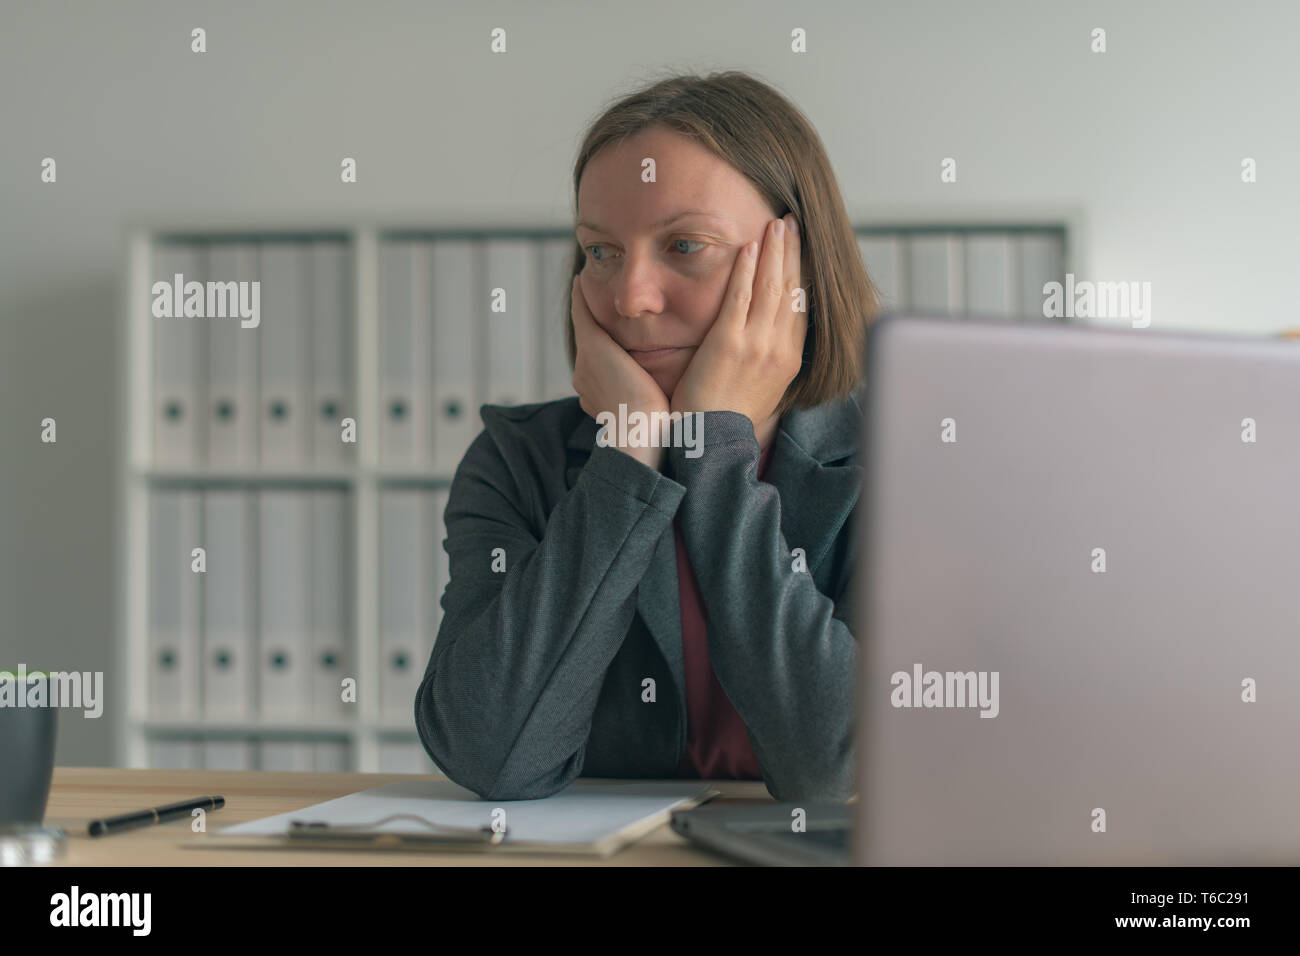 Disappointed businesswoman in office i let down by her coleagues and team Stock Photo